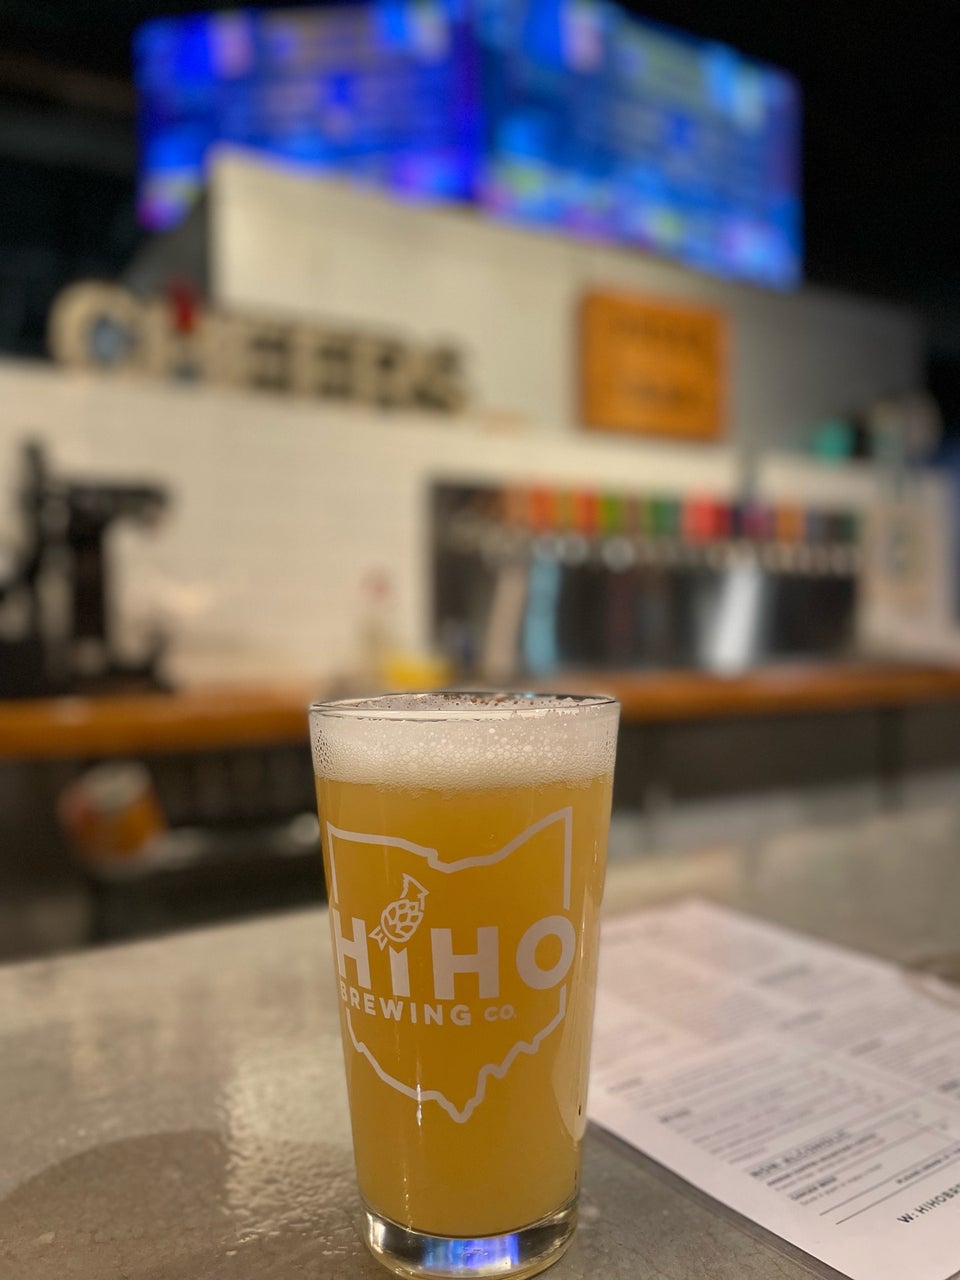 HiHO Brewing Co.